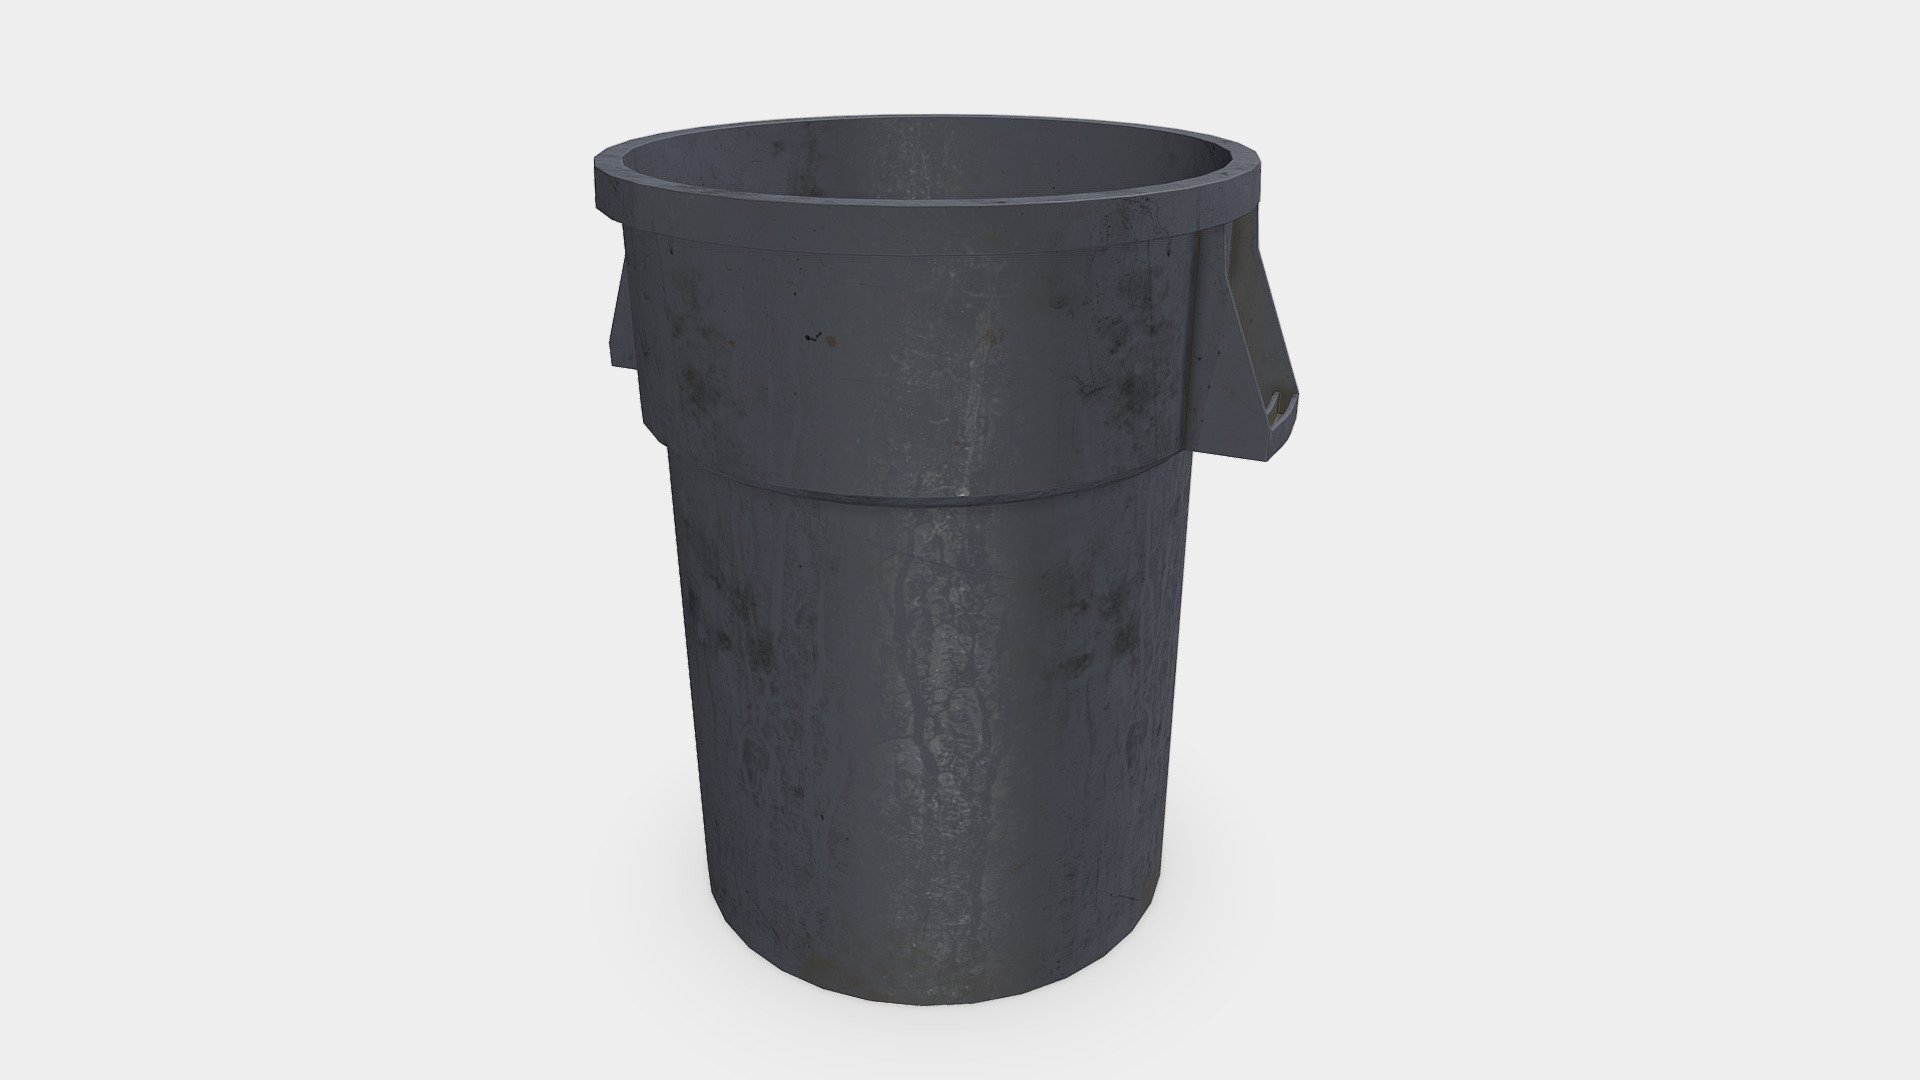 This is a game ready trash can I made for a personal project I am working on. The model consist of 3 8bit 4k textures (Base color, roughness, normal). I have also attached a 1k and 2k version 3d model